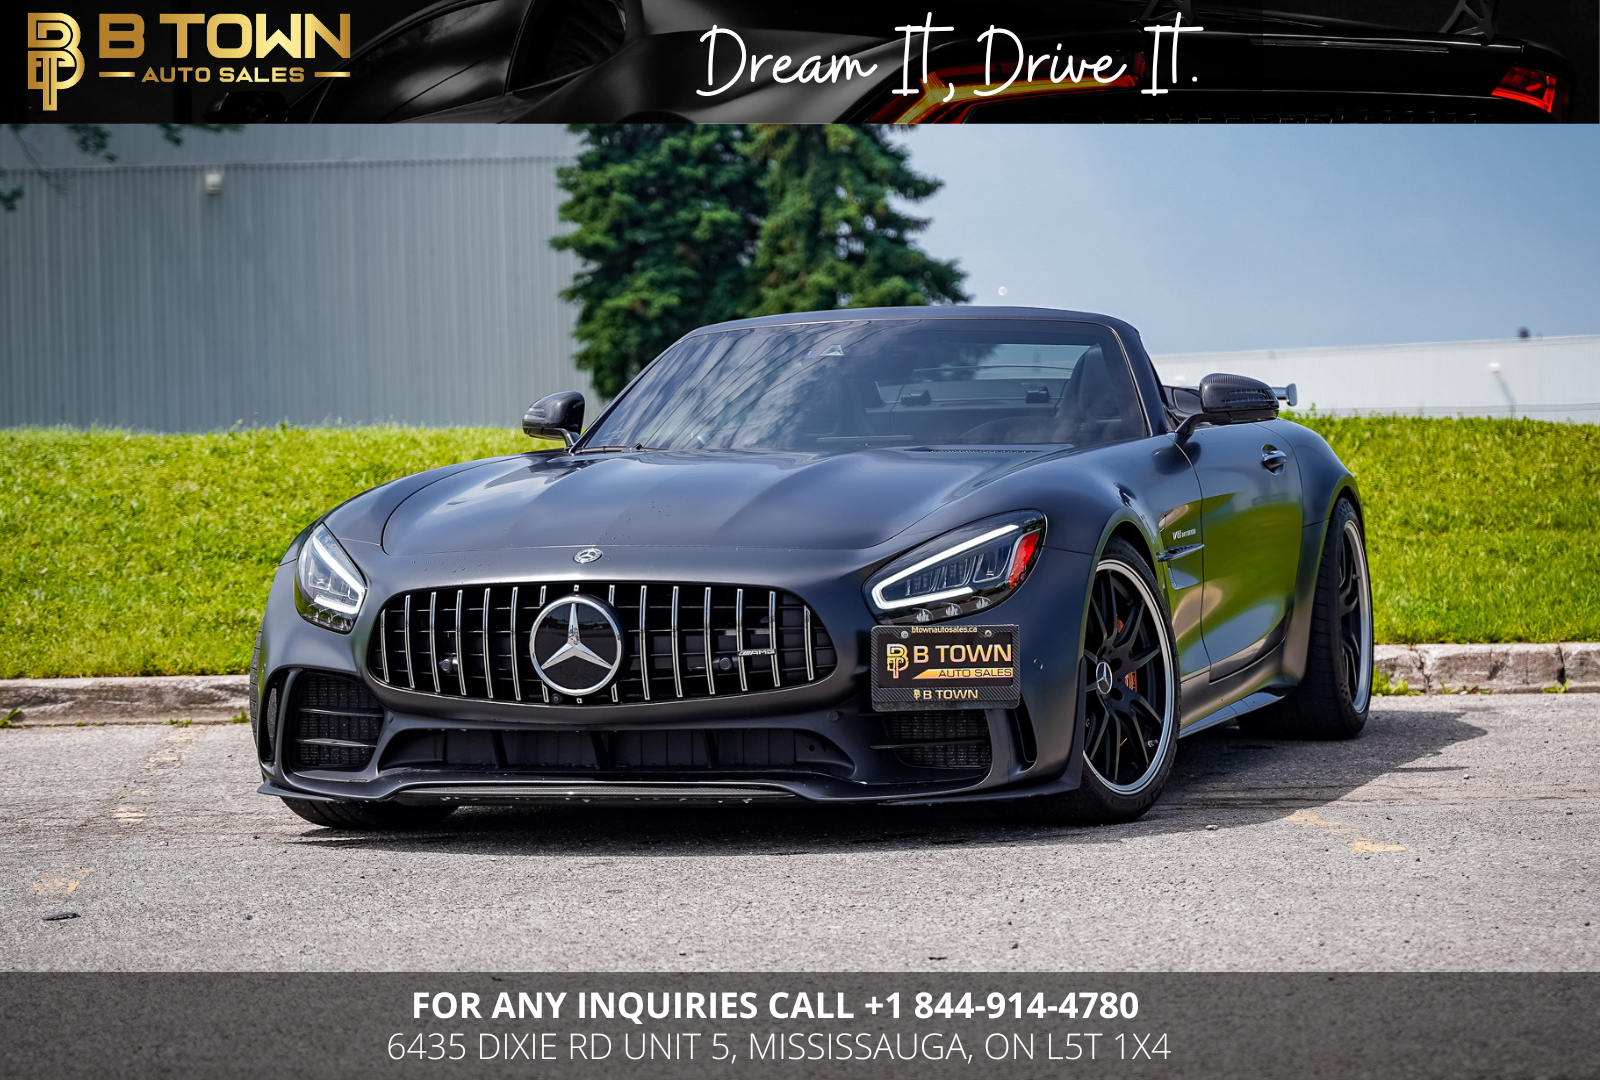 2020 Mercedes-Benz AMG GT GT R 1 of 20 For Canada 1 of 750 Worldwide-0